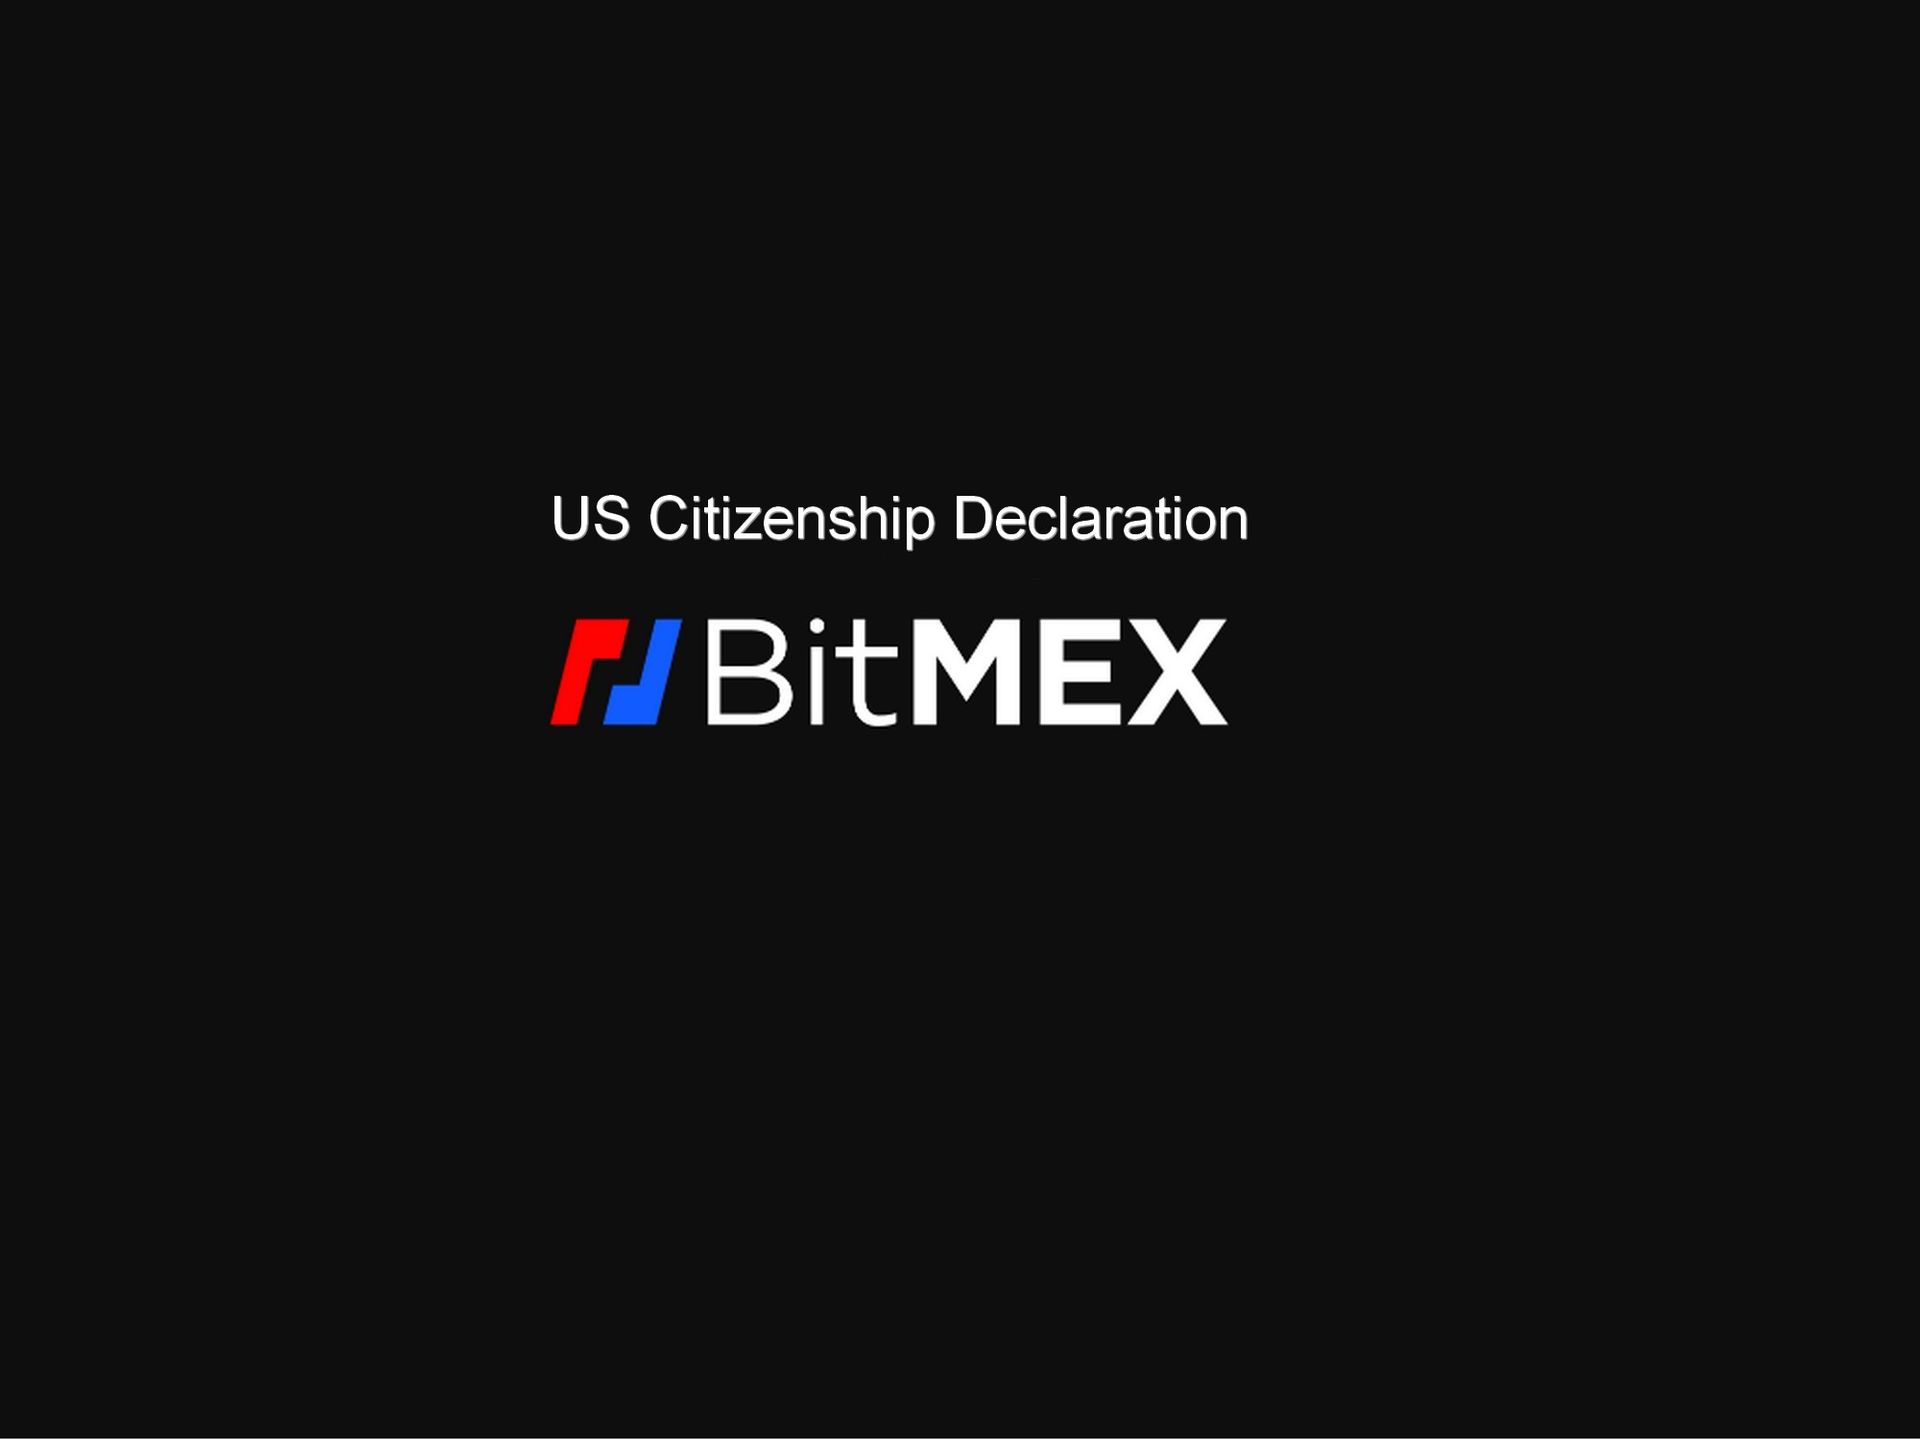 Please, complete this statement on BitMEX to continue using their services